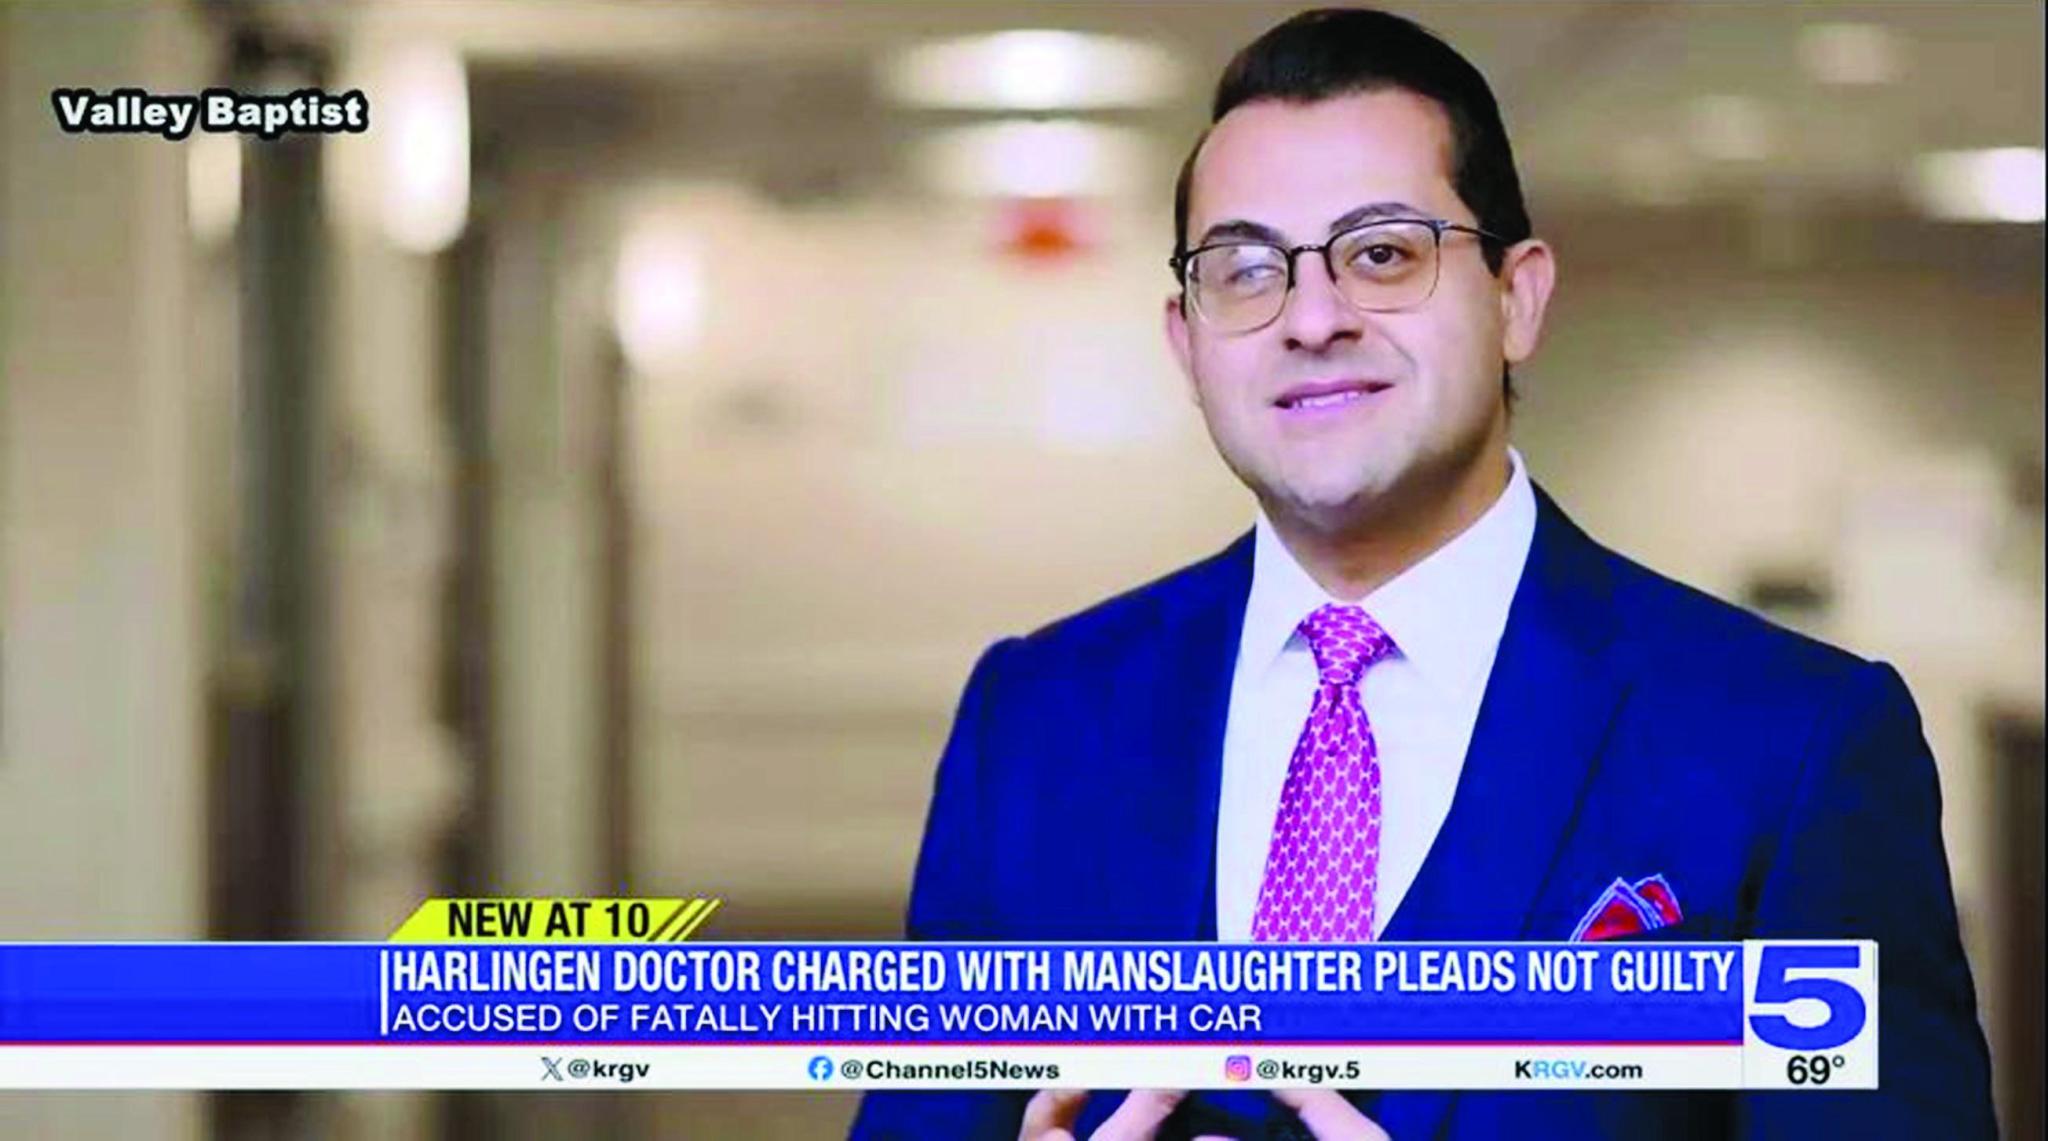 The doctor, Ameer Elsayed Hassan, with his indictment front and center on local TV. Not a place anyone, let alone, a practicing physician, wants to be — accused of a wrongful death.